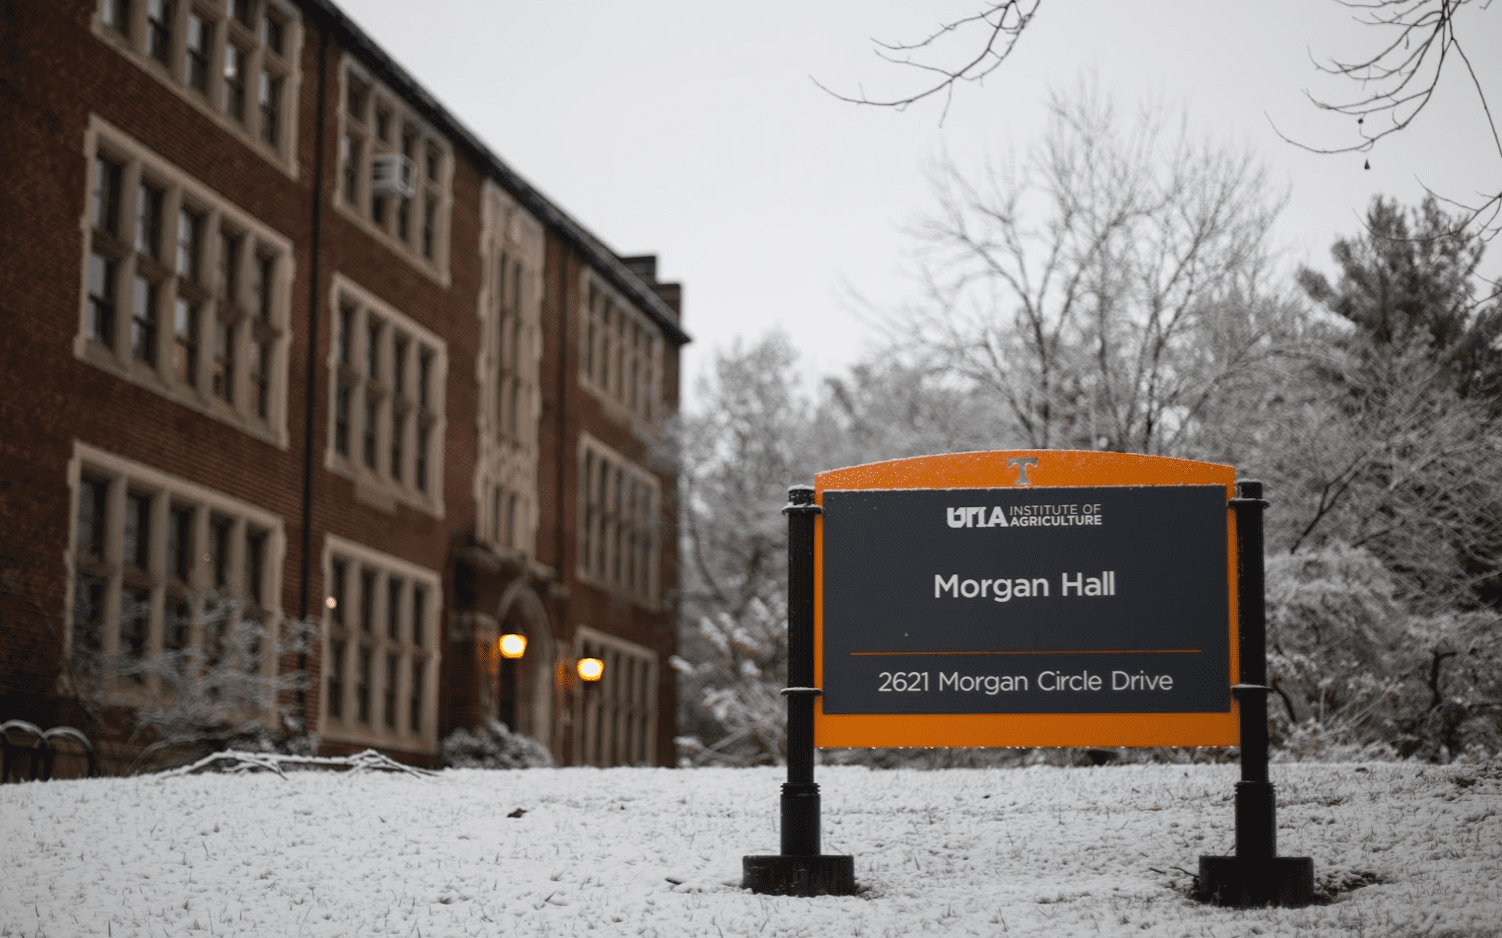 A winter picture of Morgan Hall